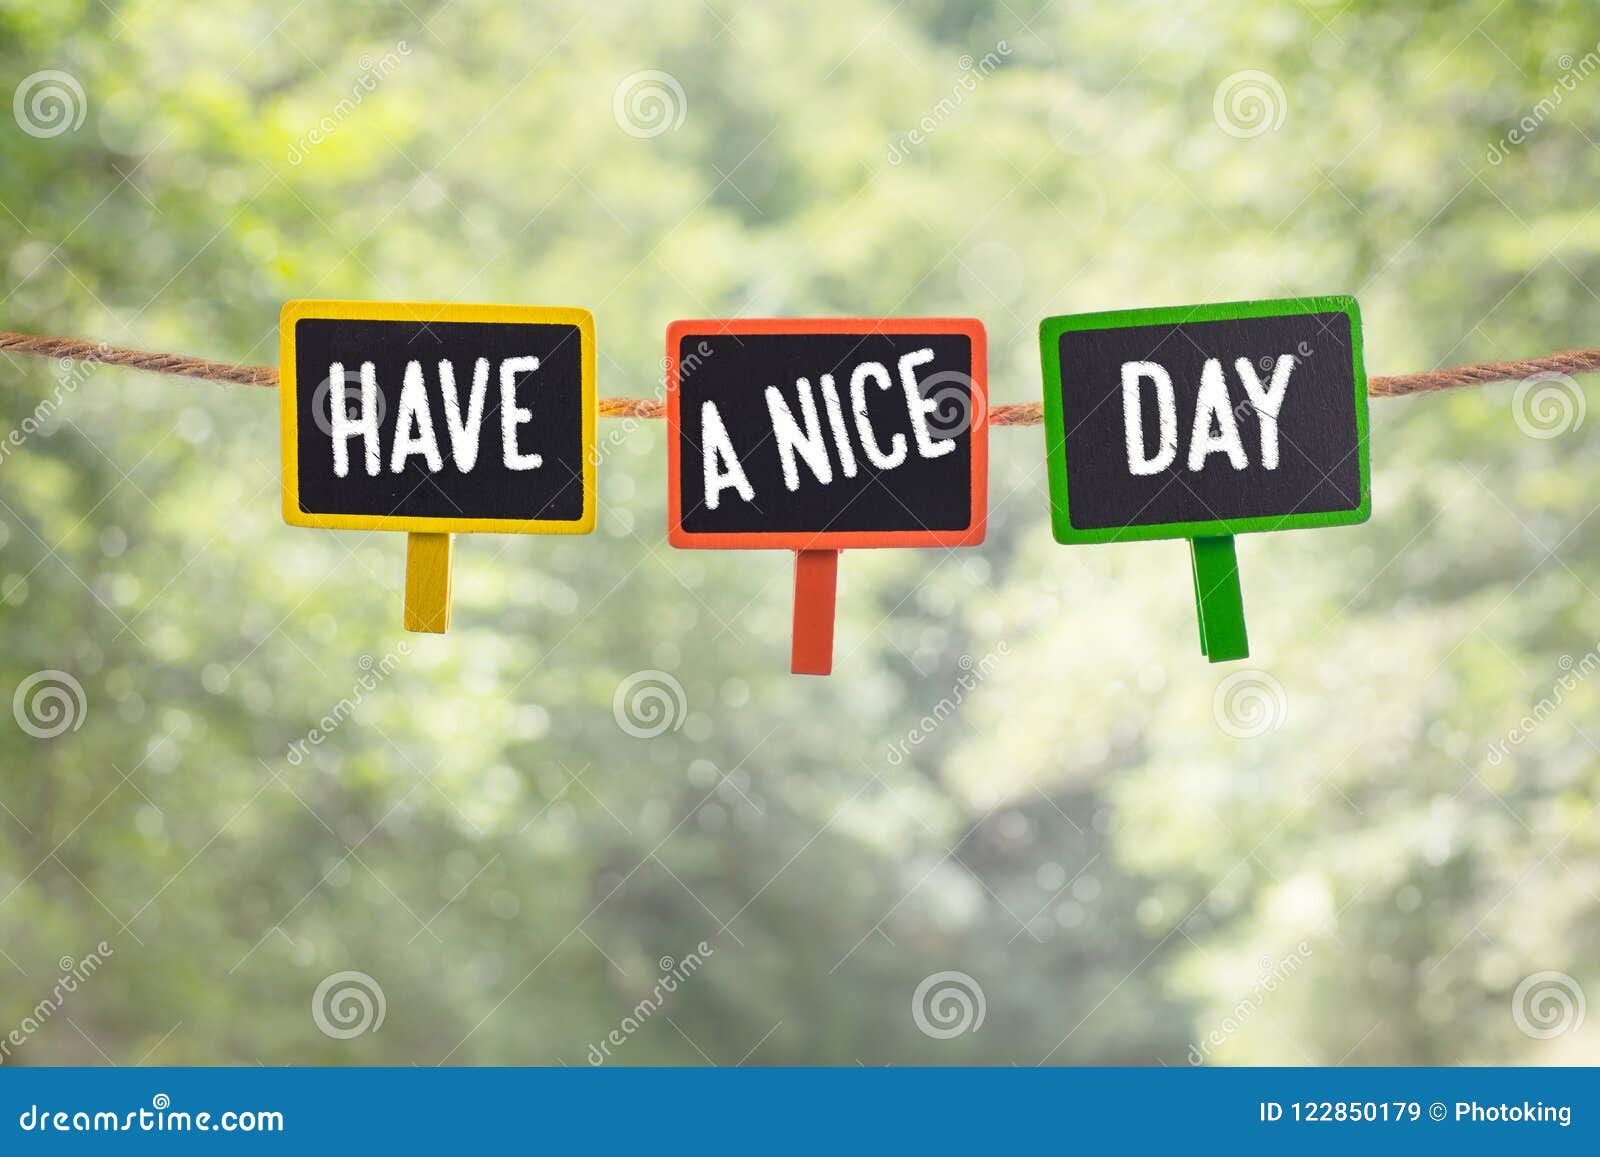 Have A Nice Day On Board Stock Image Image Of Color 122850179